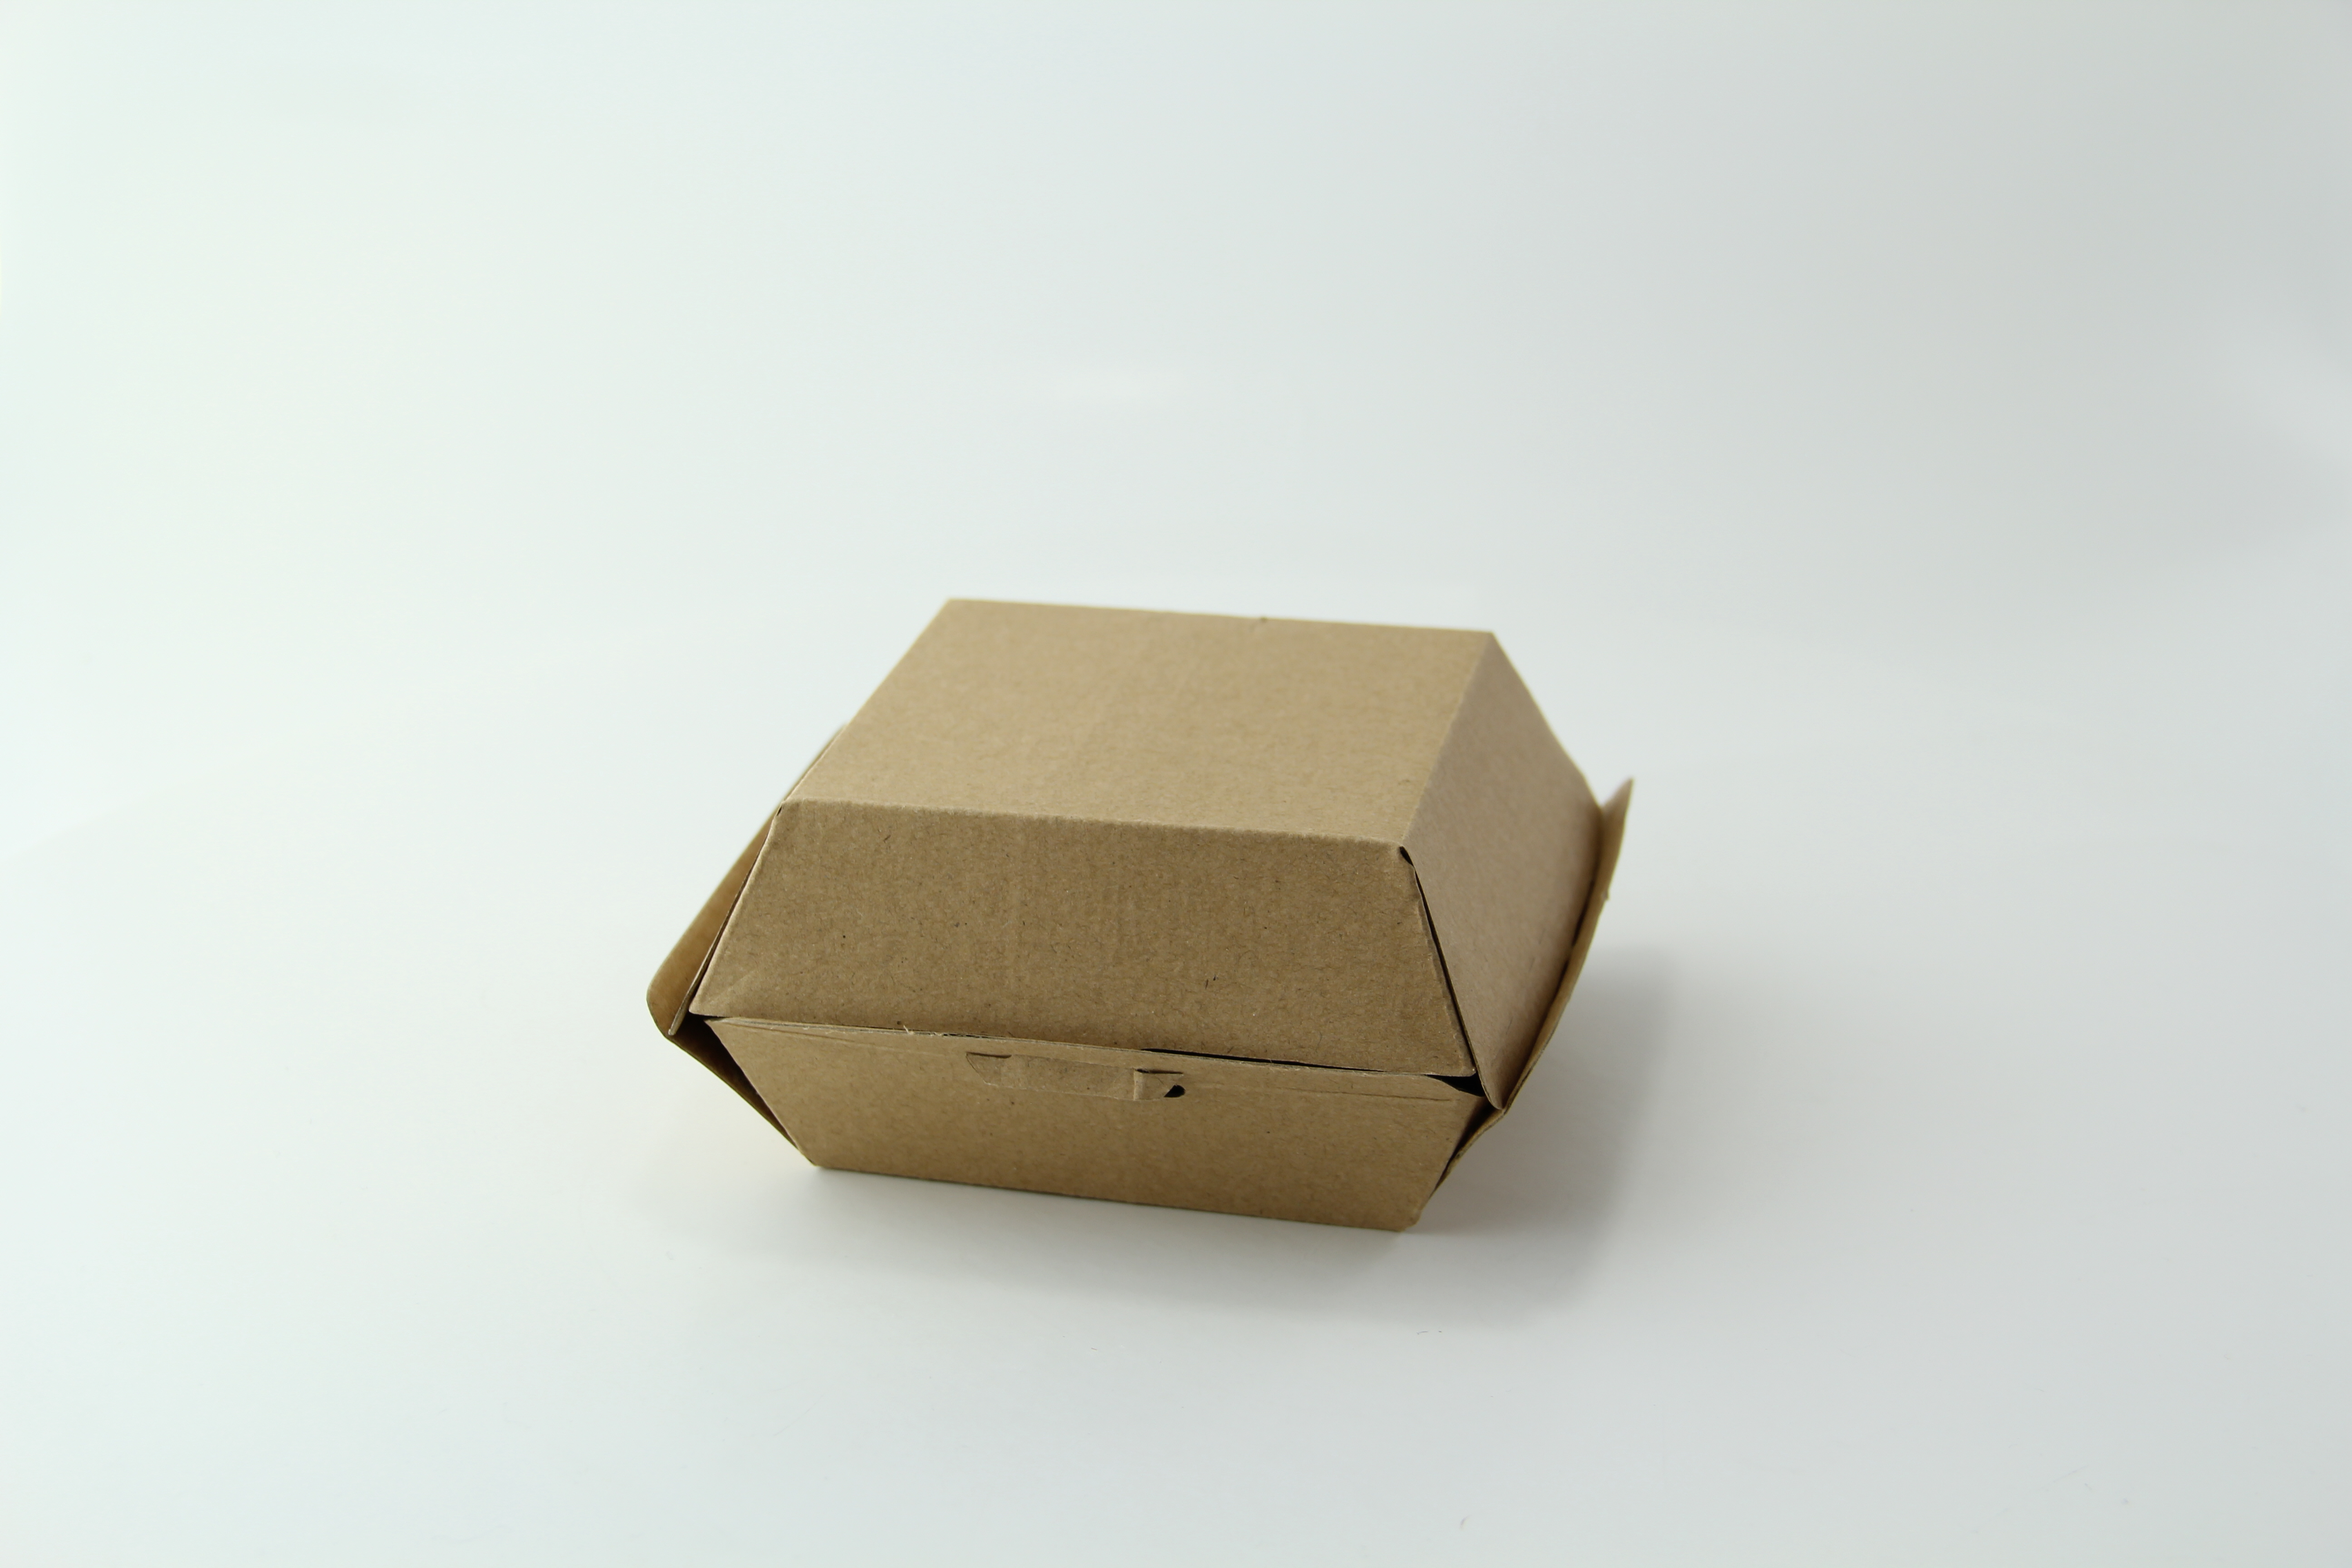 0445 CORRUGATED CARRY OUT BOX WITH HANDLE, KRAFT, 1/25 – AmerCareRoyal